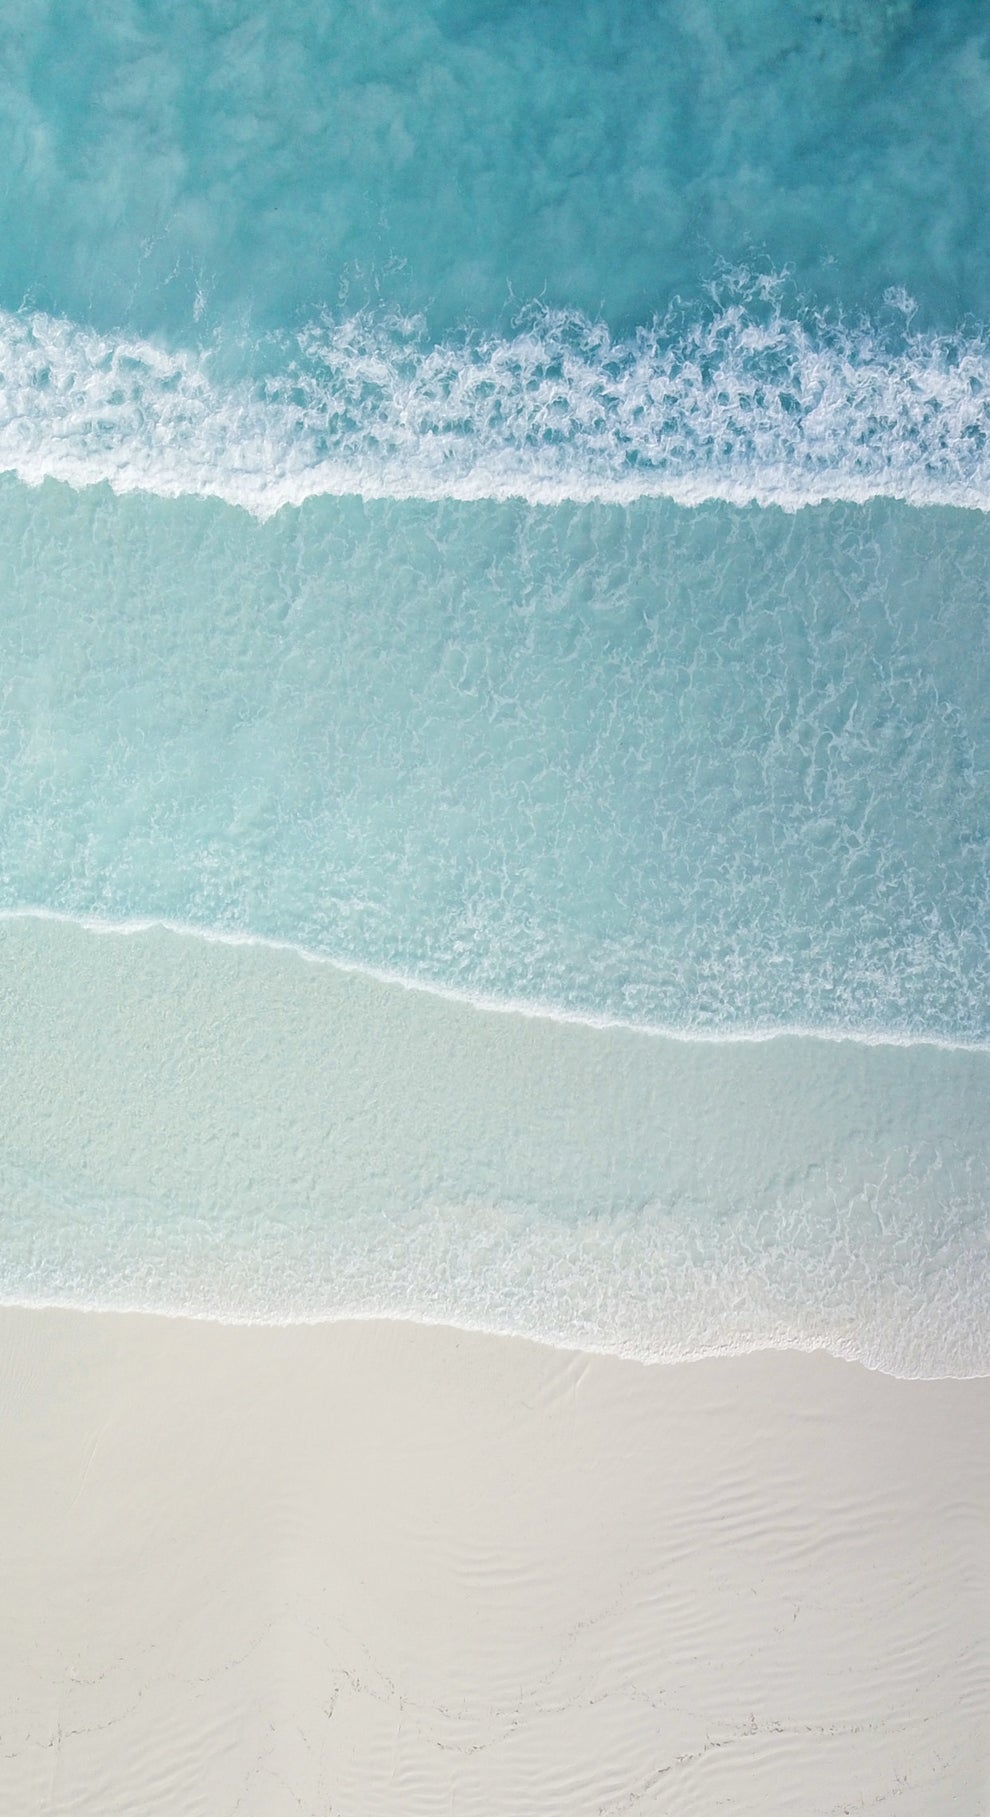 22 iPhone Wallpapers For Anyone Who Just Really Loves Water